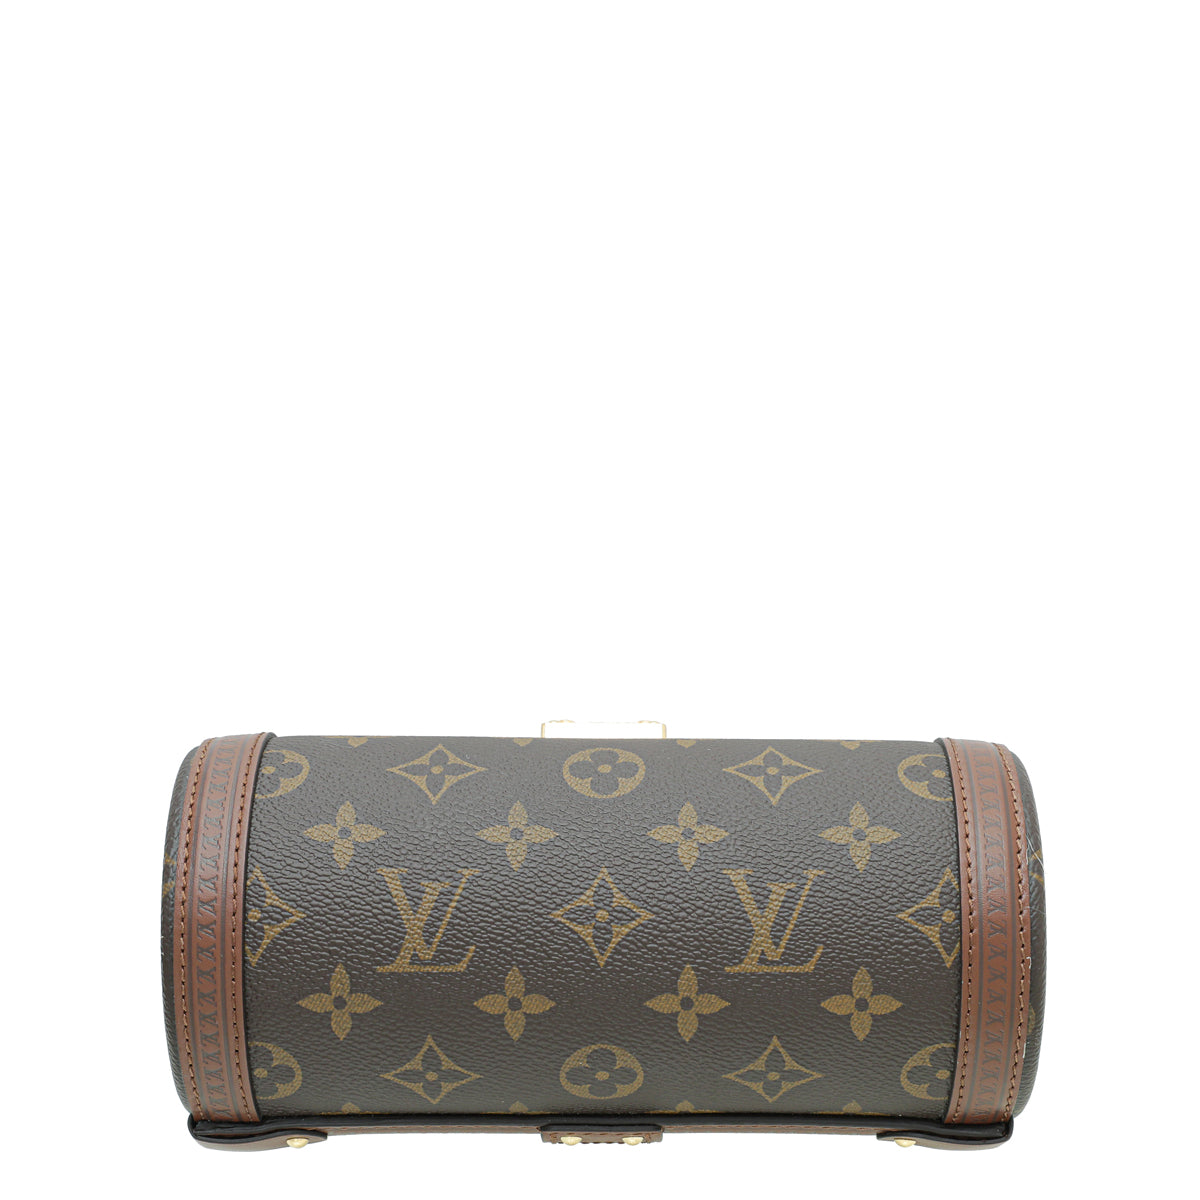 Louis Vuitton - Authenticated Papillon Trunk Handbag - Leather Brown for Women, Never Worn, with Tag